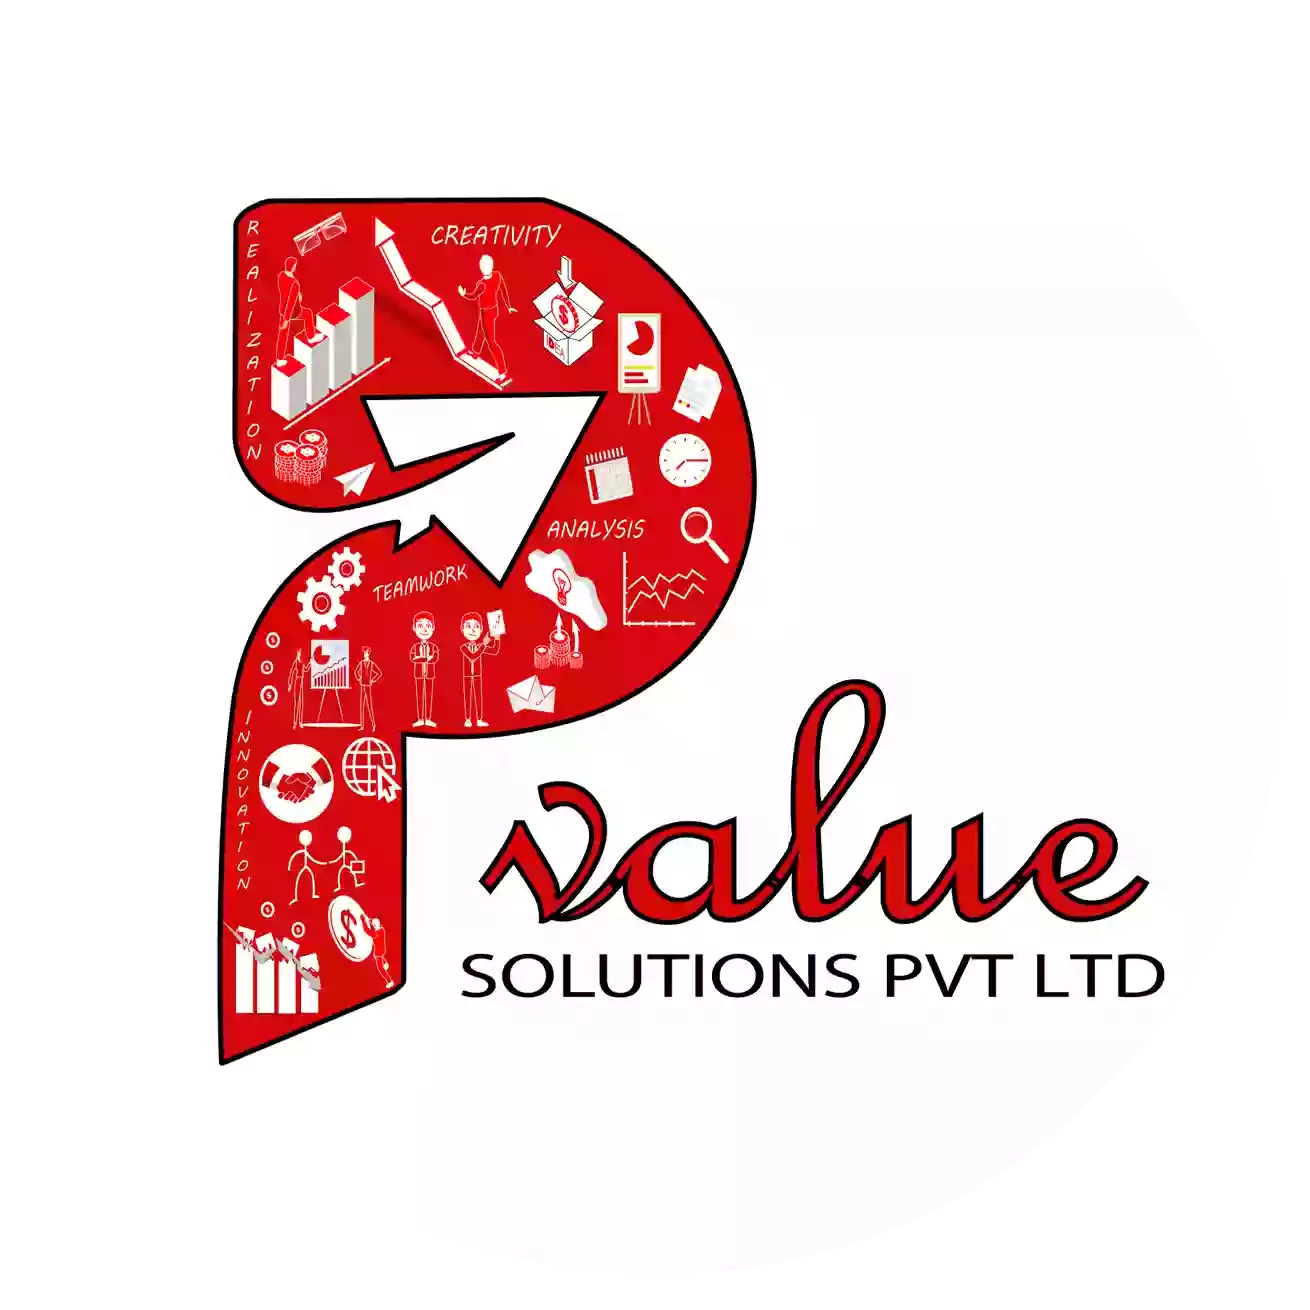 Biostatistics, Data Analysis, Data science project and Training PValue Solutions